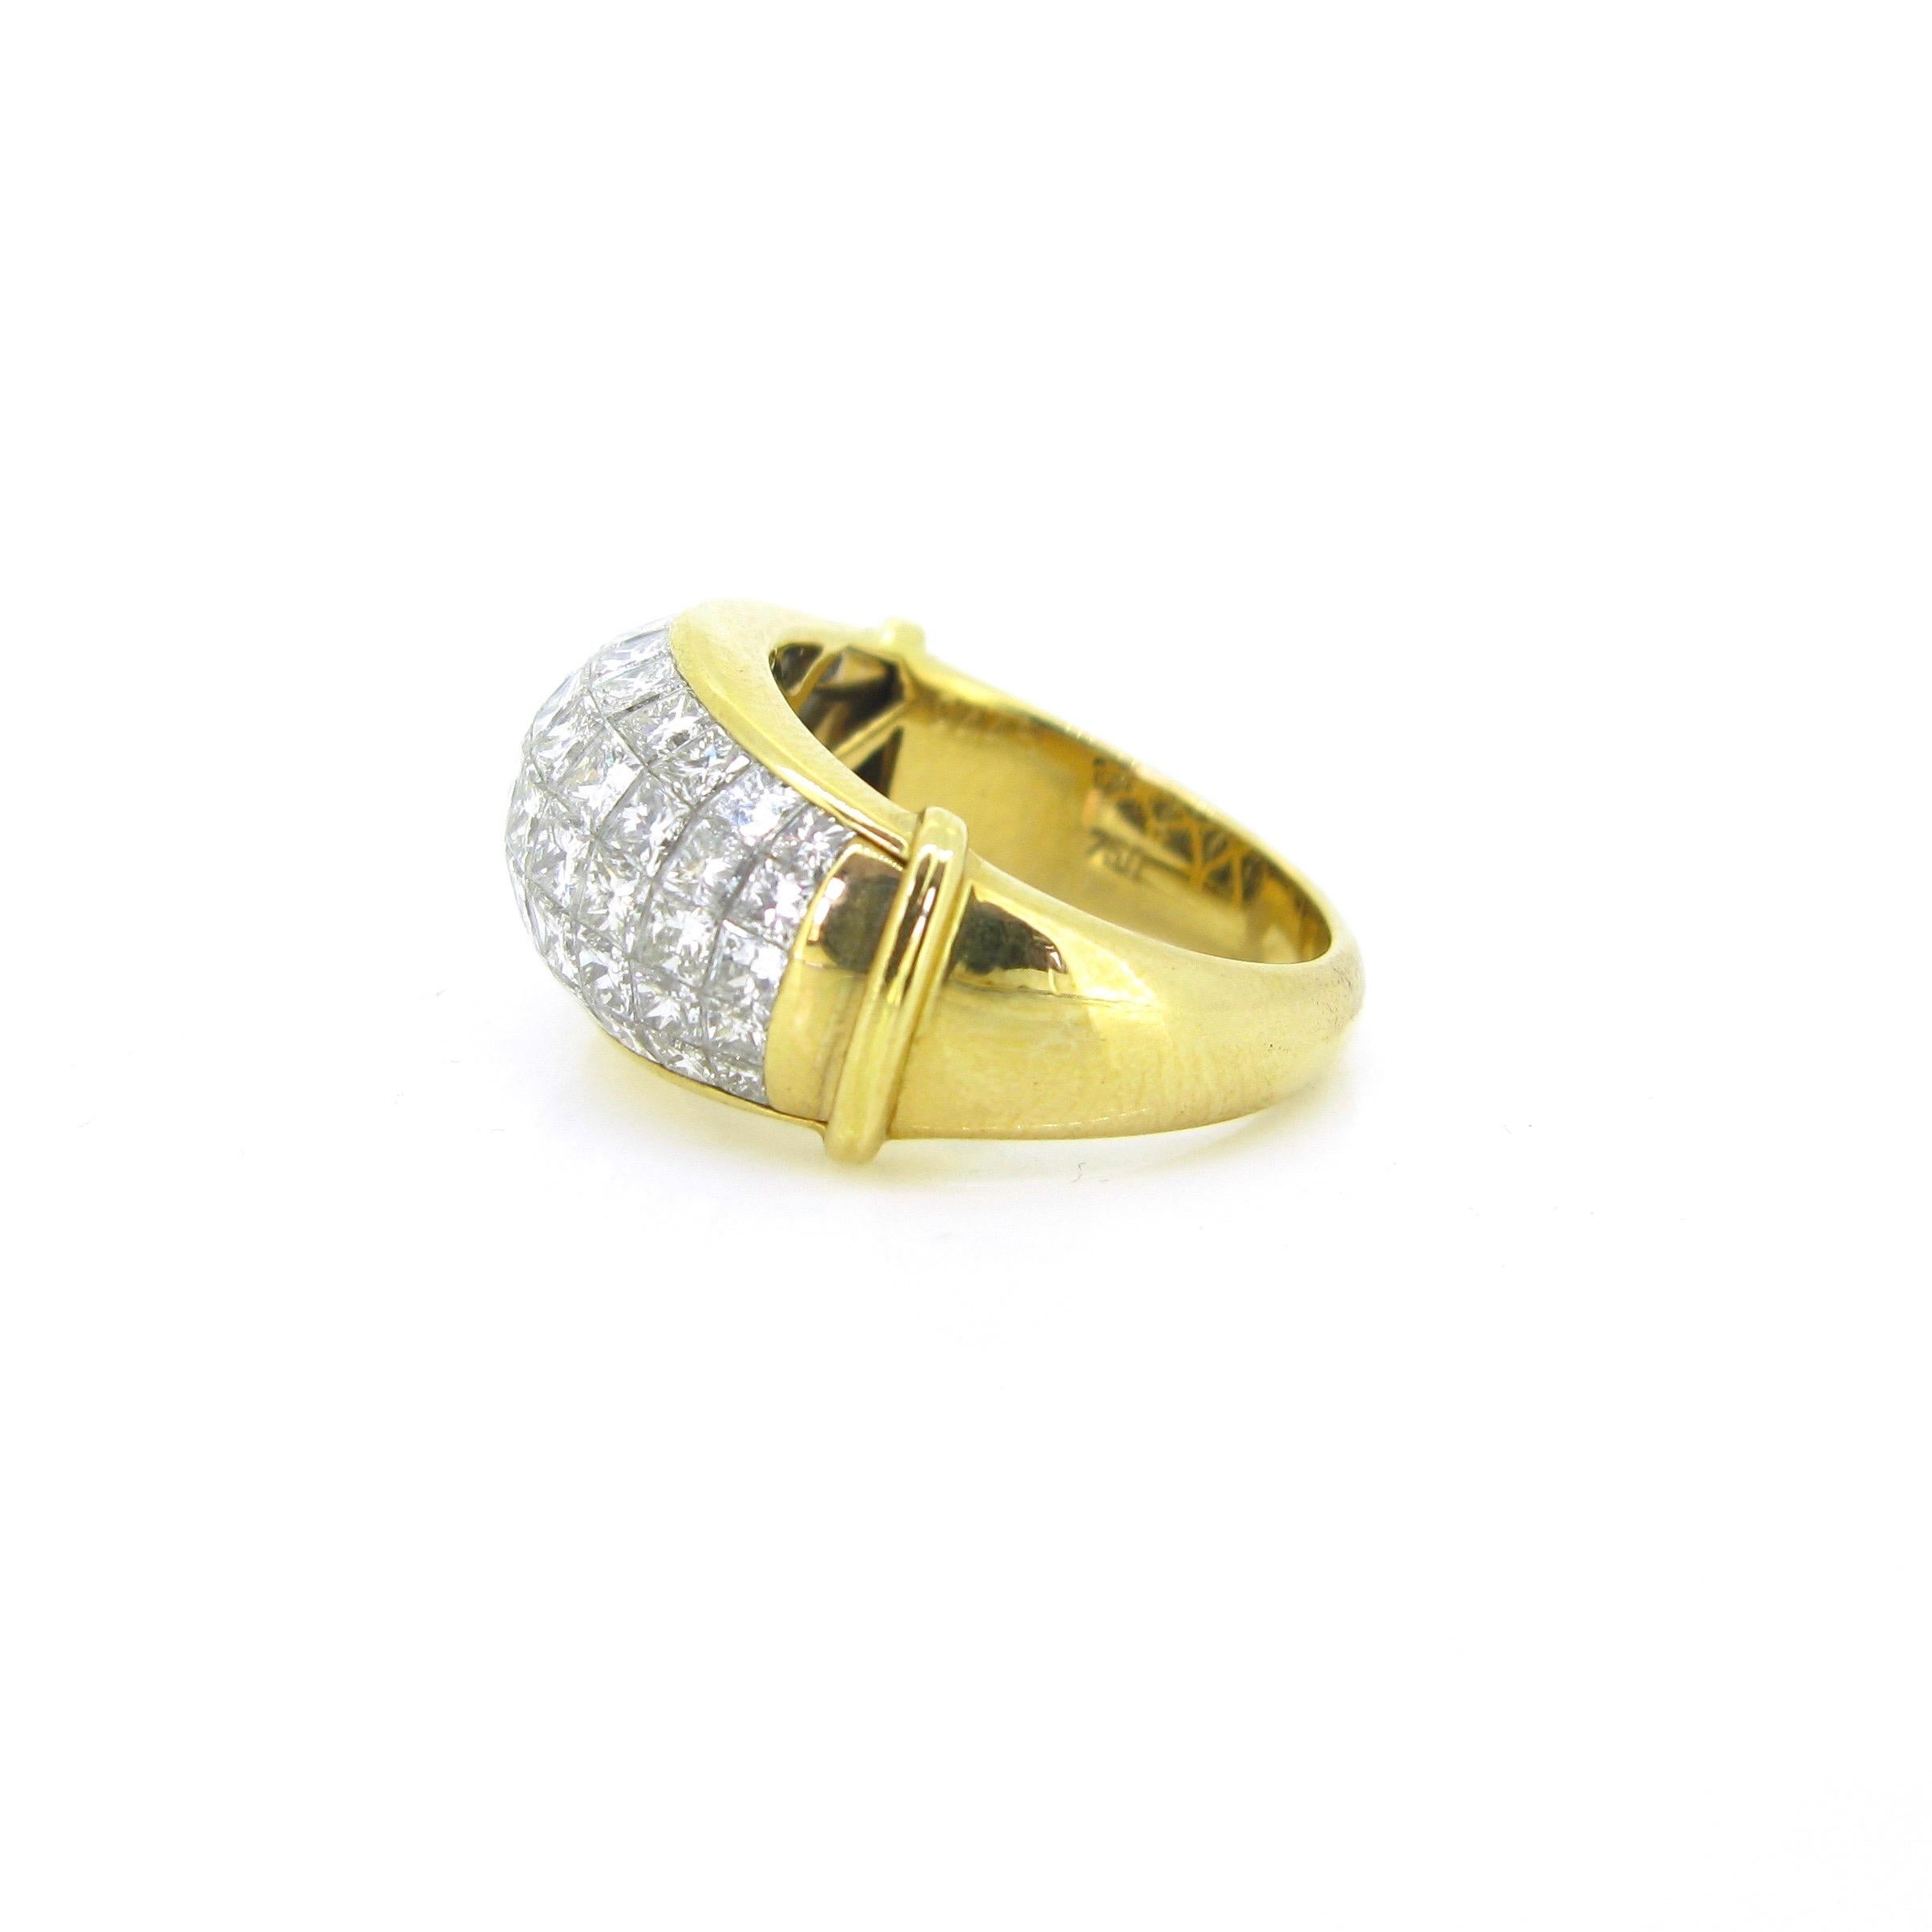 Princess Cut Diamonds Serti Mysterieux Yellow Gold Pave Band Dome Cocktail Ring 2